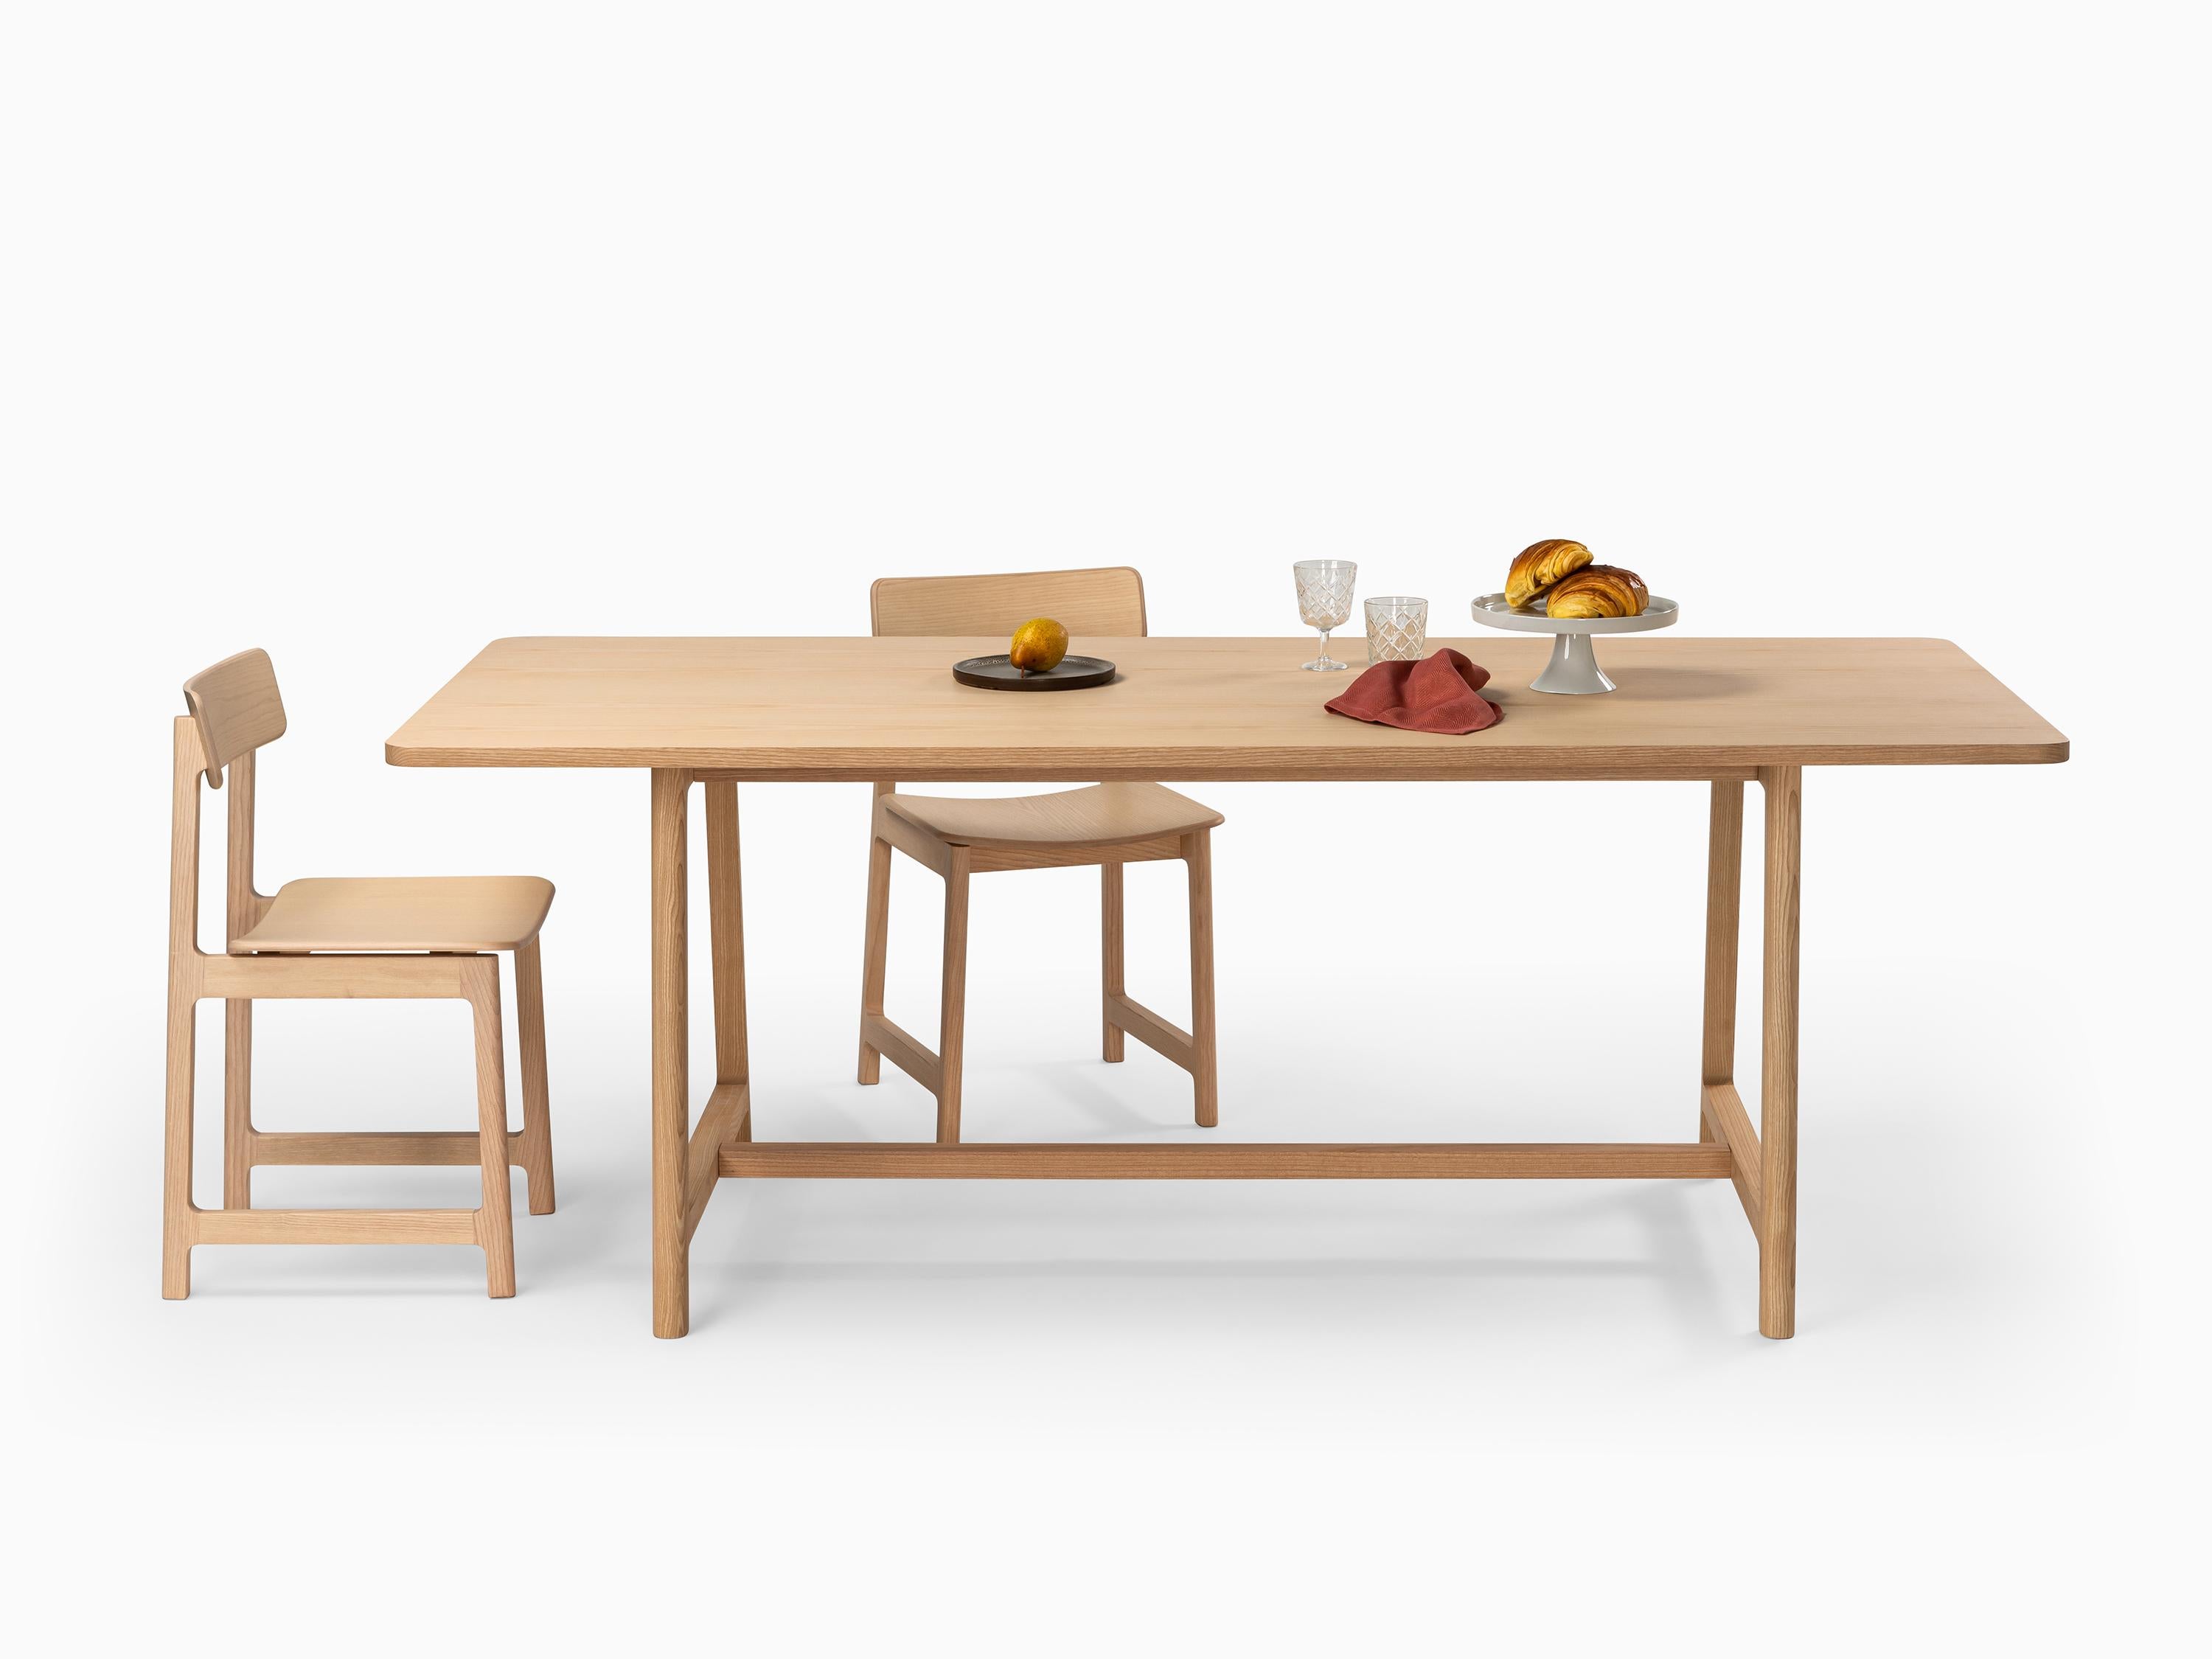 Machine-Made Minimalist Modern Table in Walnut Wood Frame Collection For Sale